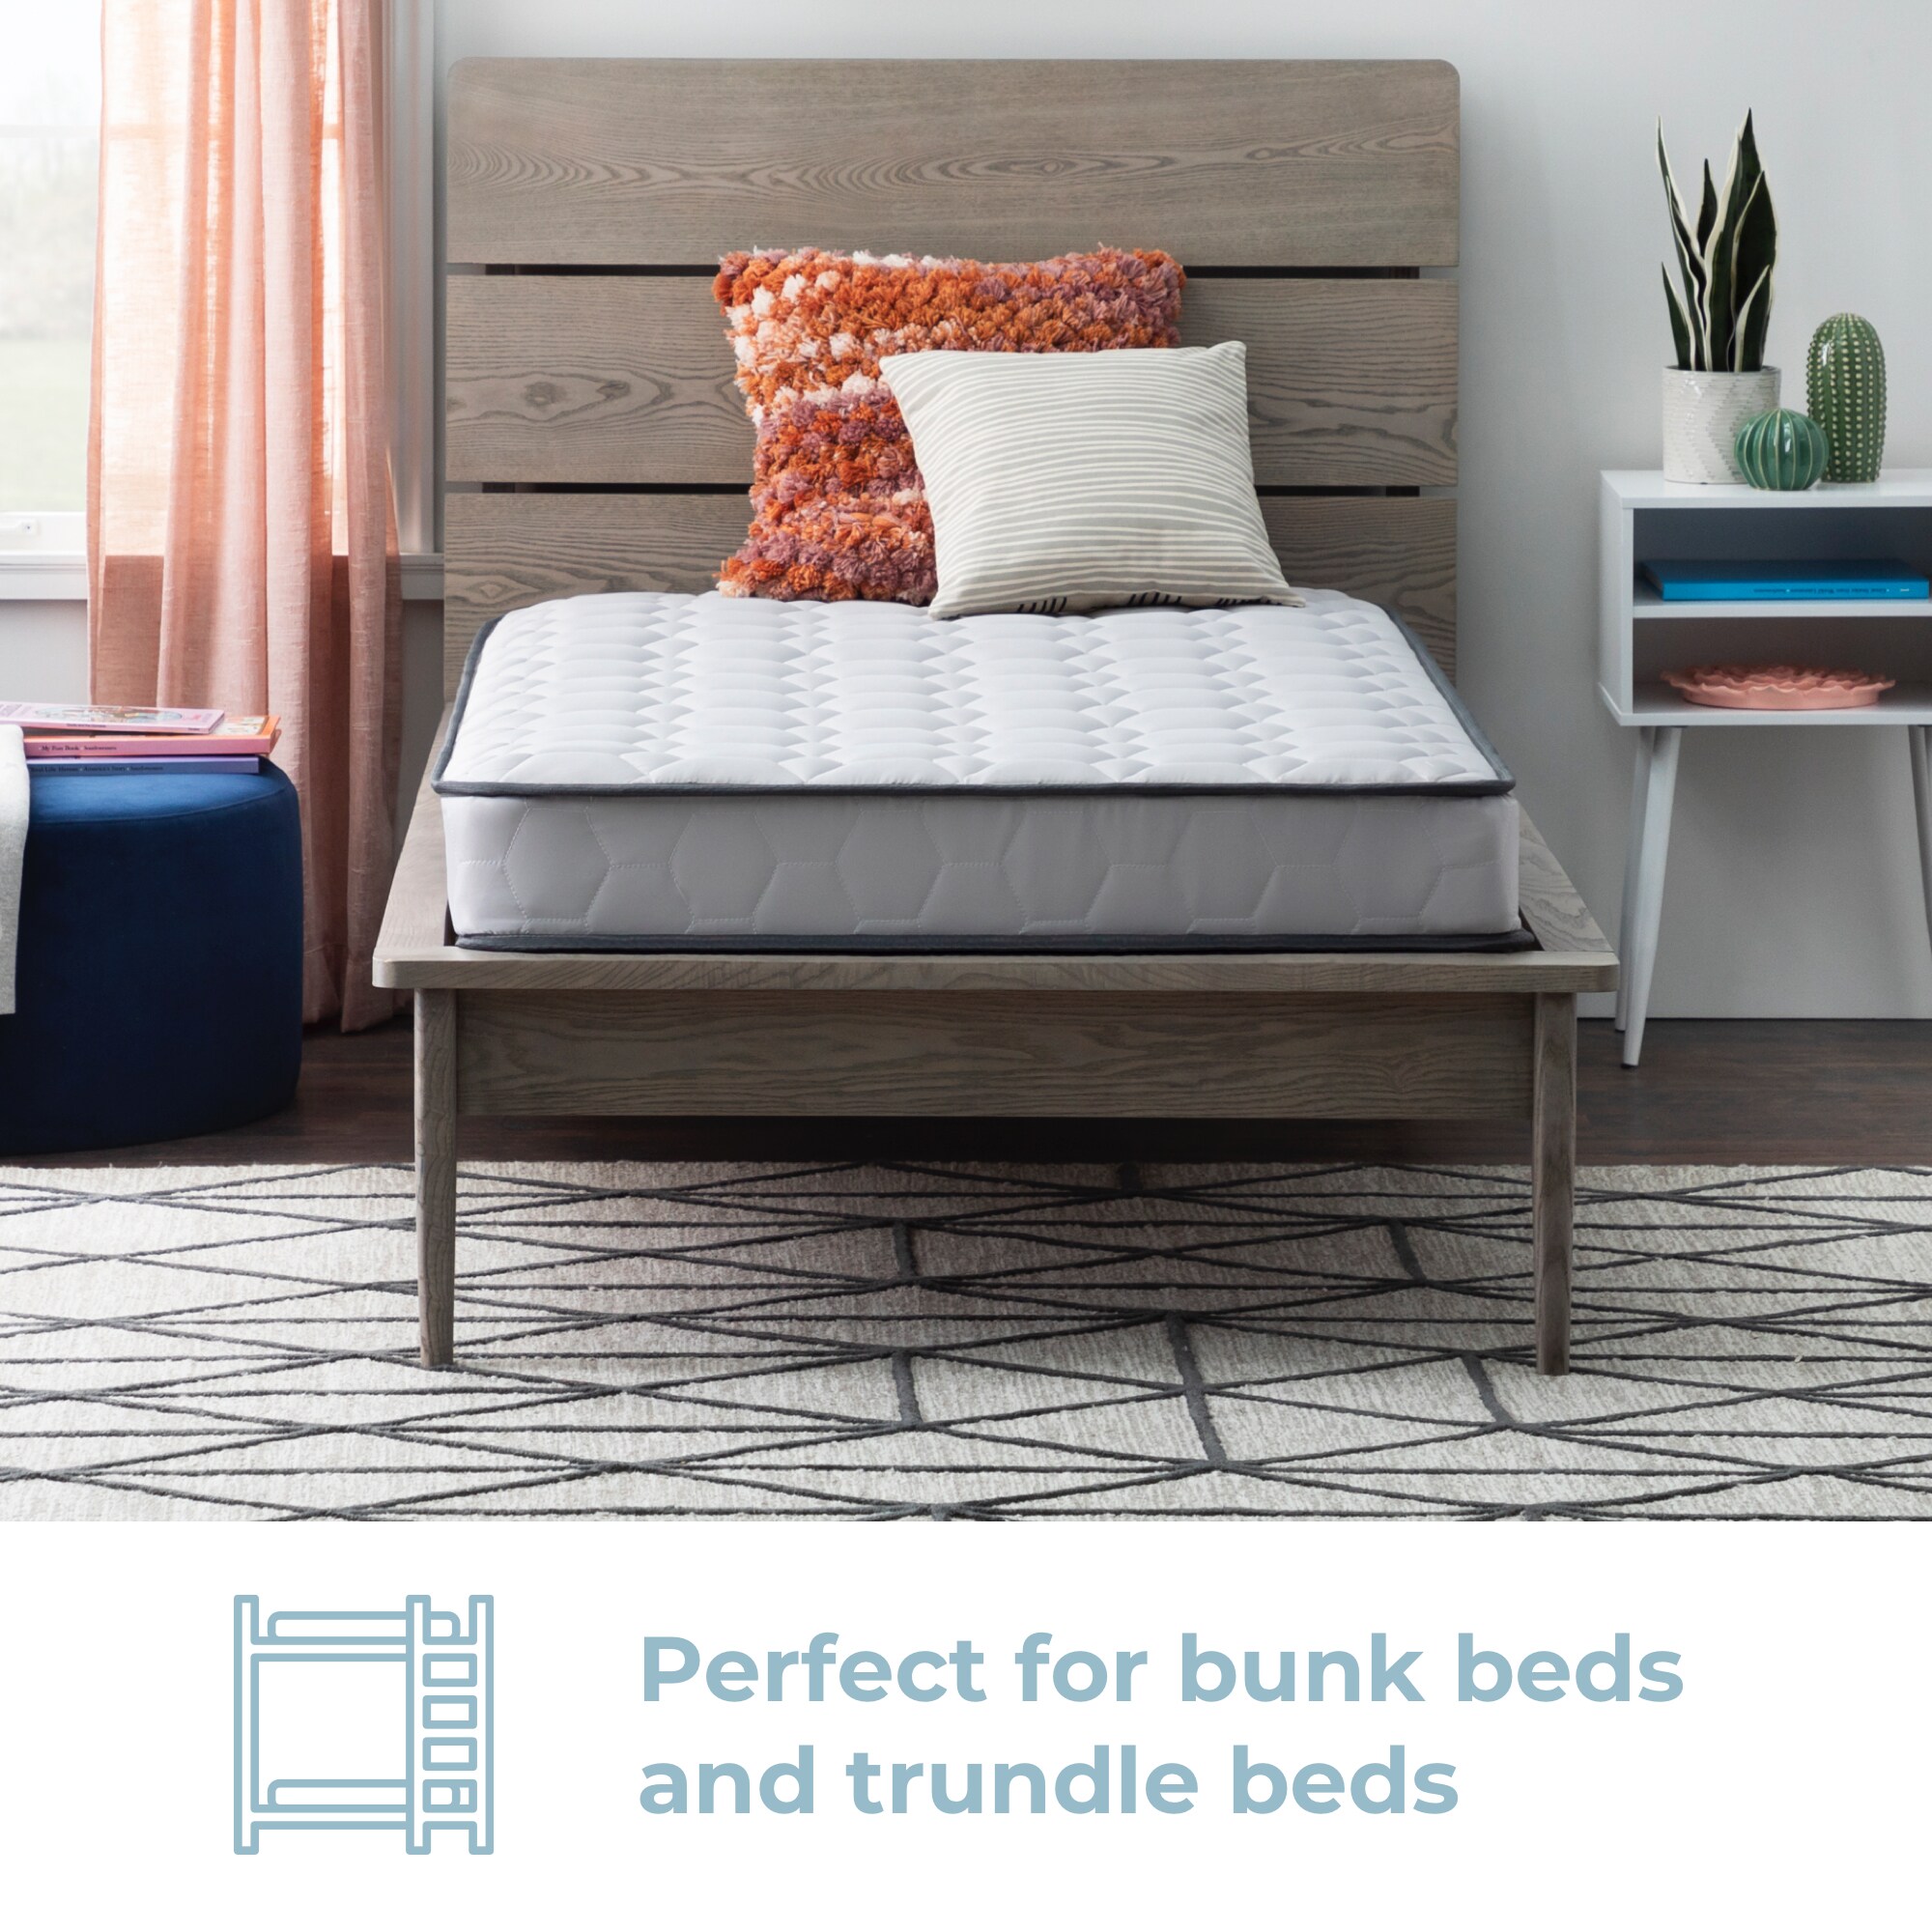 Trundle Beds / Zinus 6 Inch Spring Twin Mattress 2 pack Perfect for Bunk Beds 